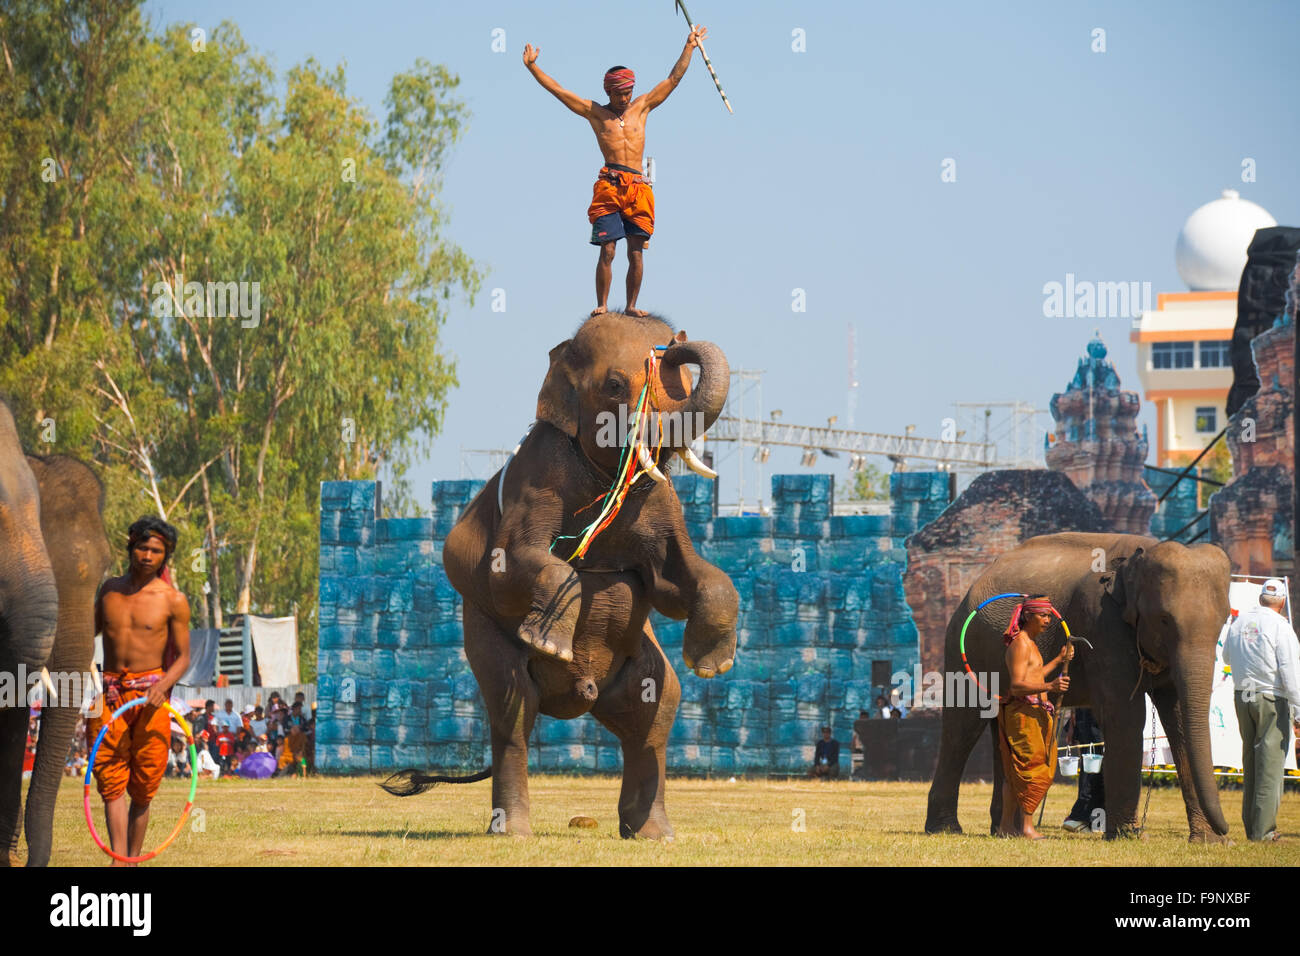 Mahout trainer standing on elephant head as it's rearing up, standing on its two hind legs at trick show Surin Elephant Round-Up Stock Photo